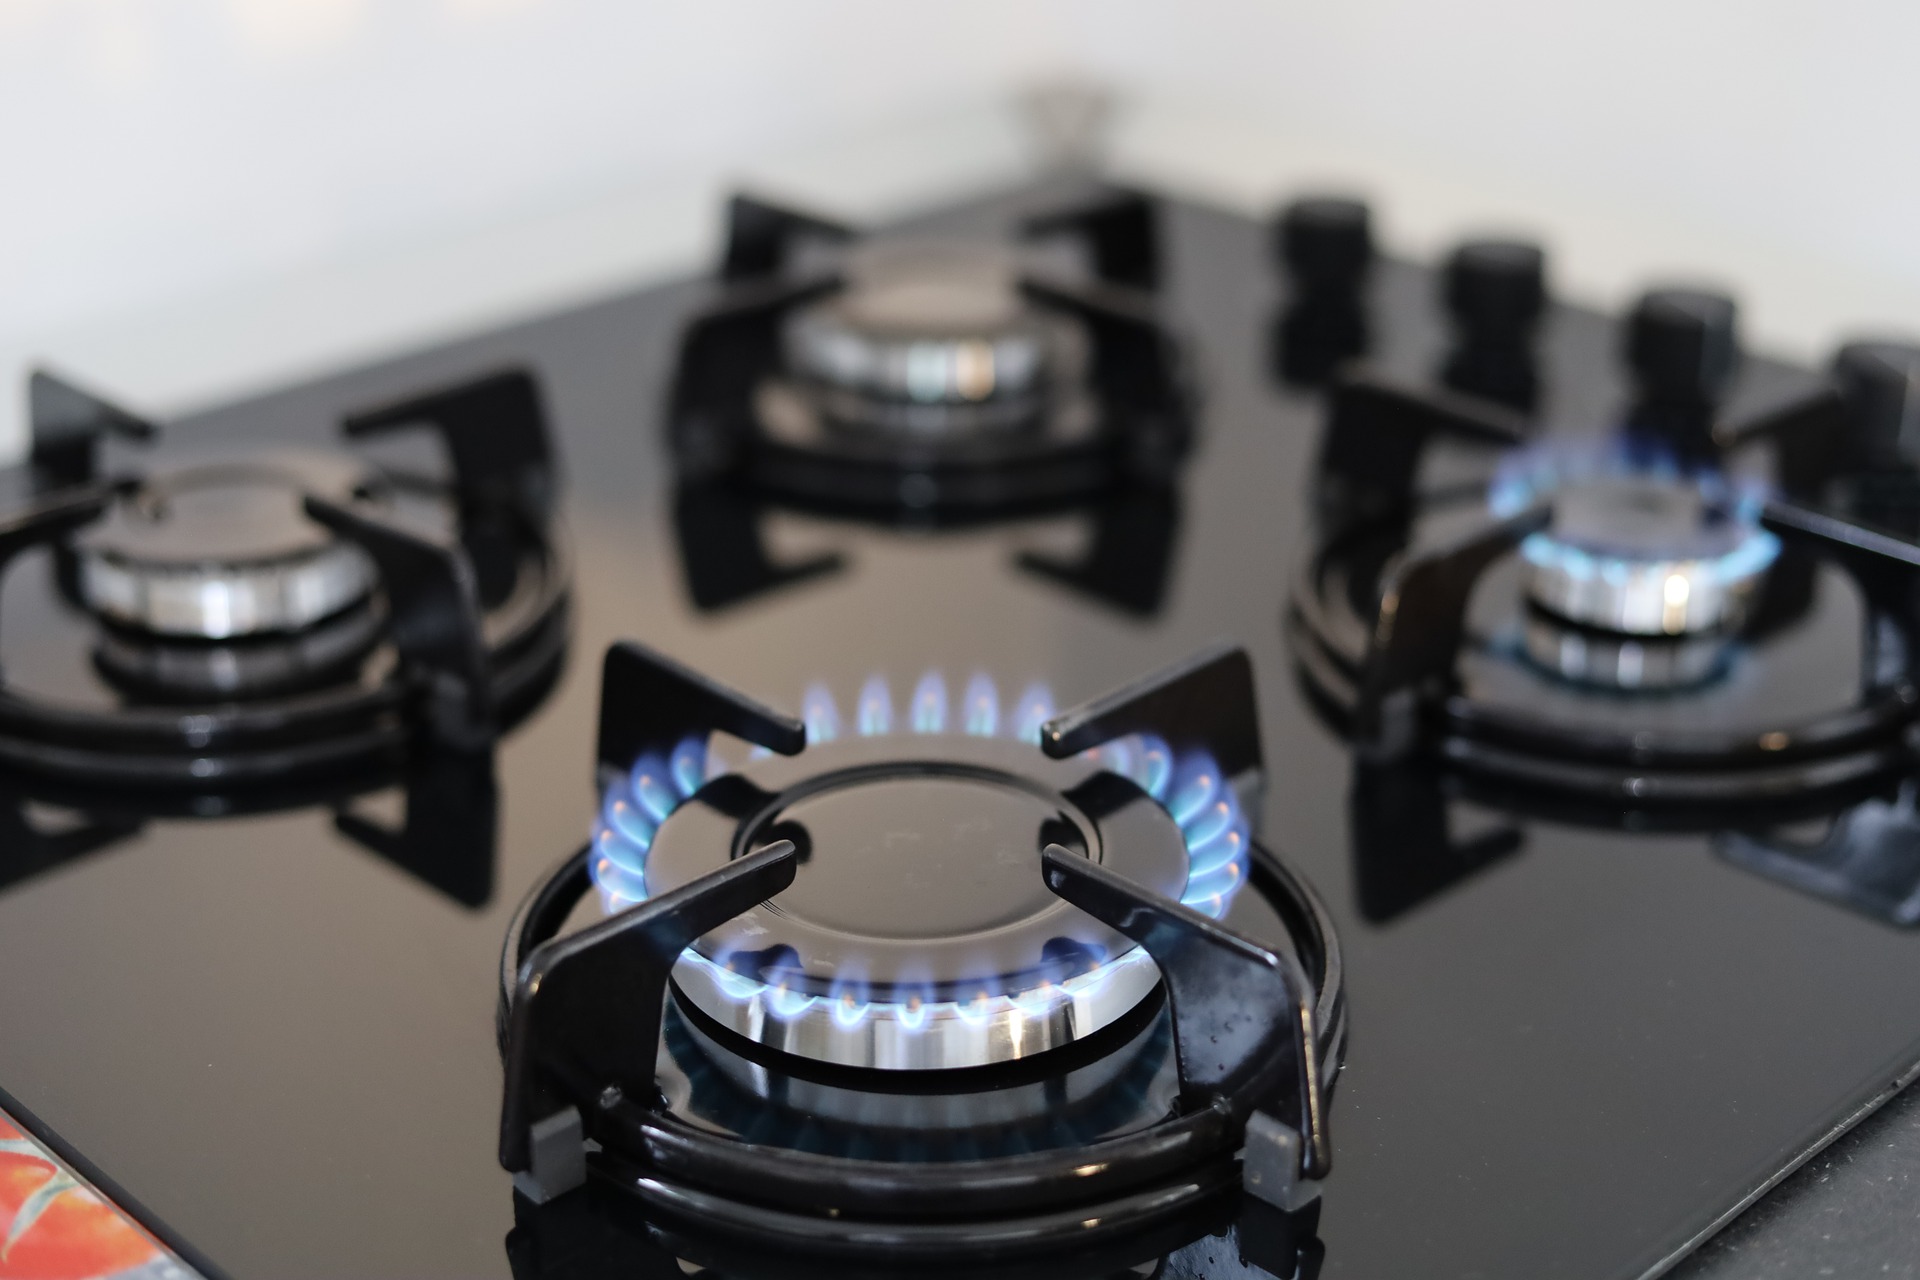 How to cook safely if you're stuck with a gas stove - The Washington Post